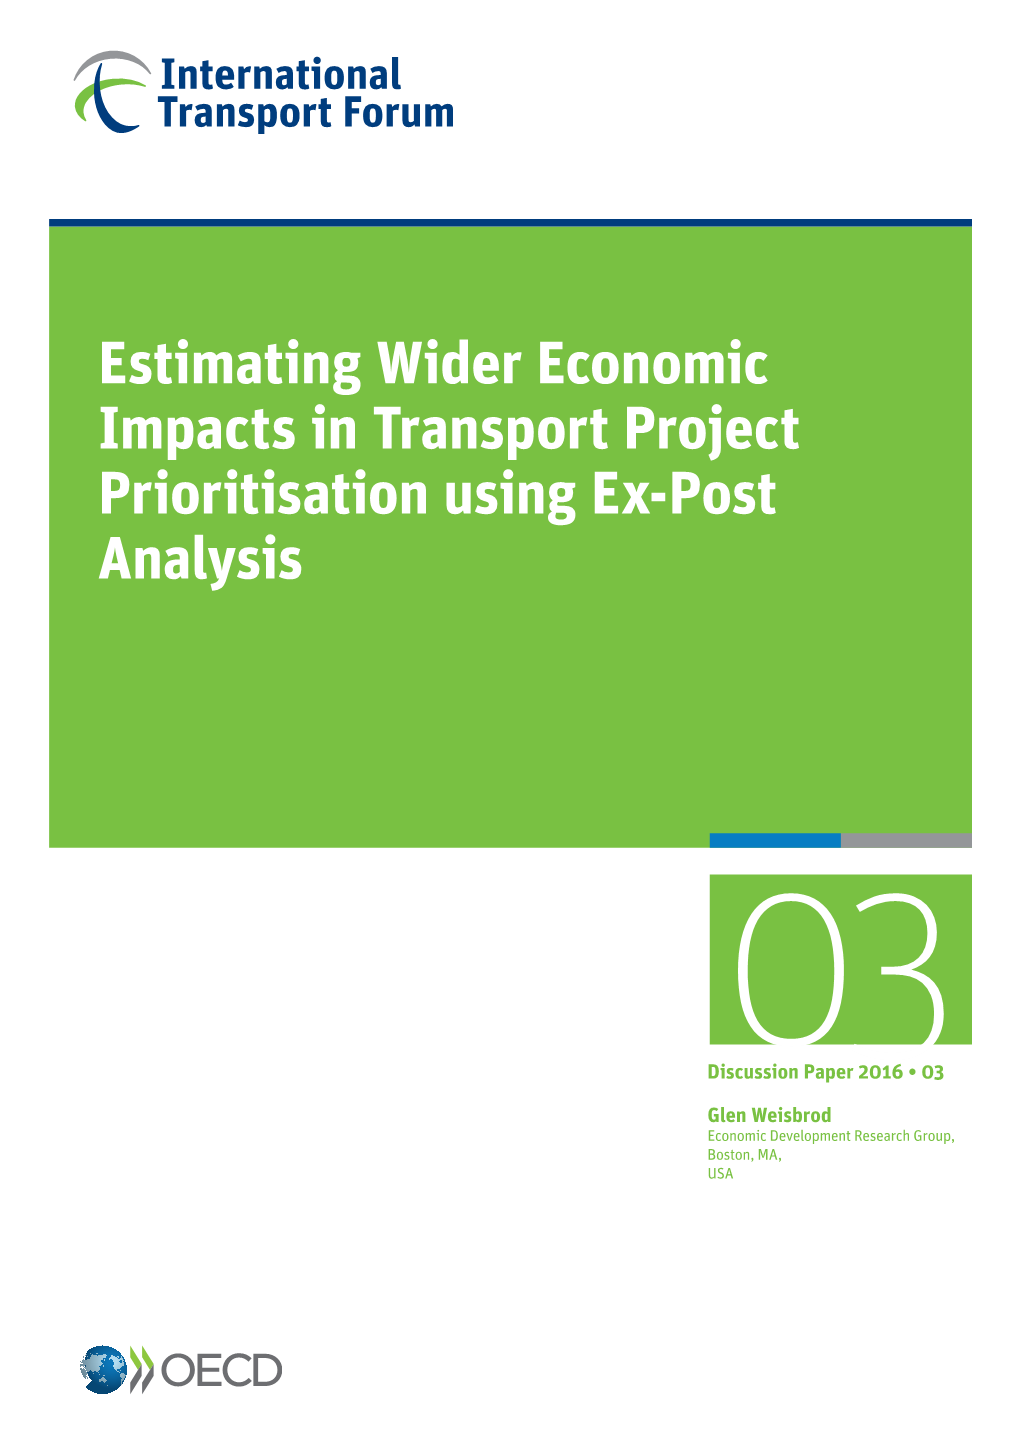 Estimating Wider Economic Impacts in Transport Project Prioritisation Using Ex-Post Analysis